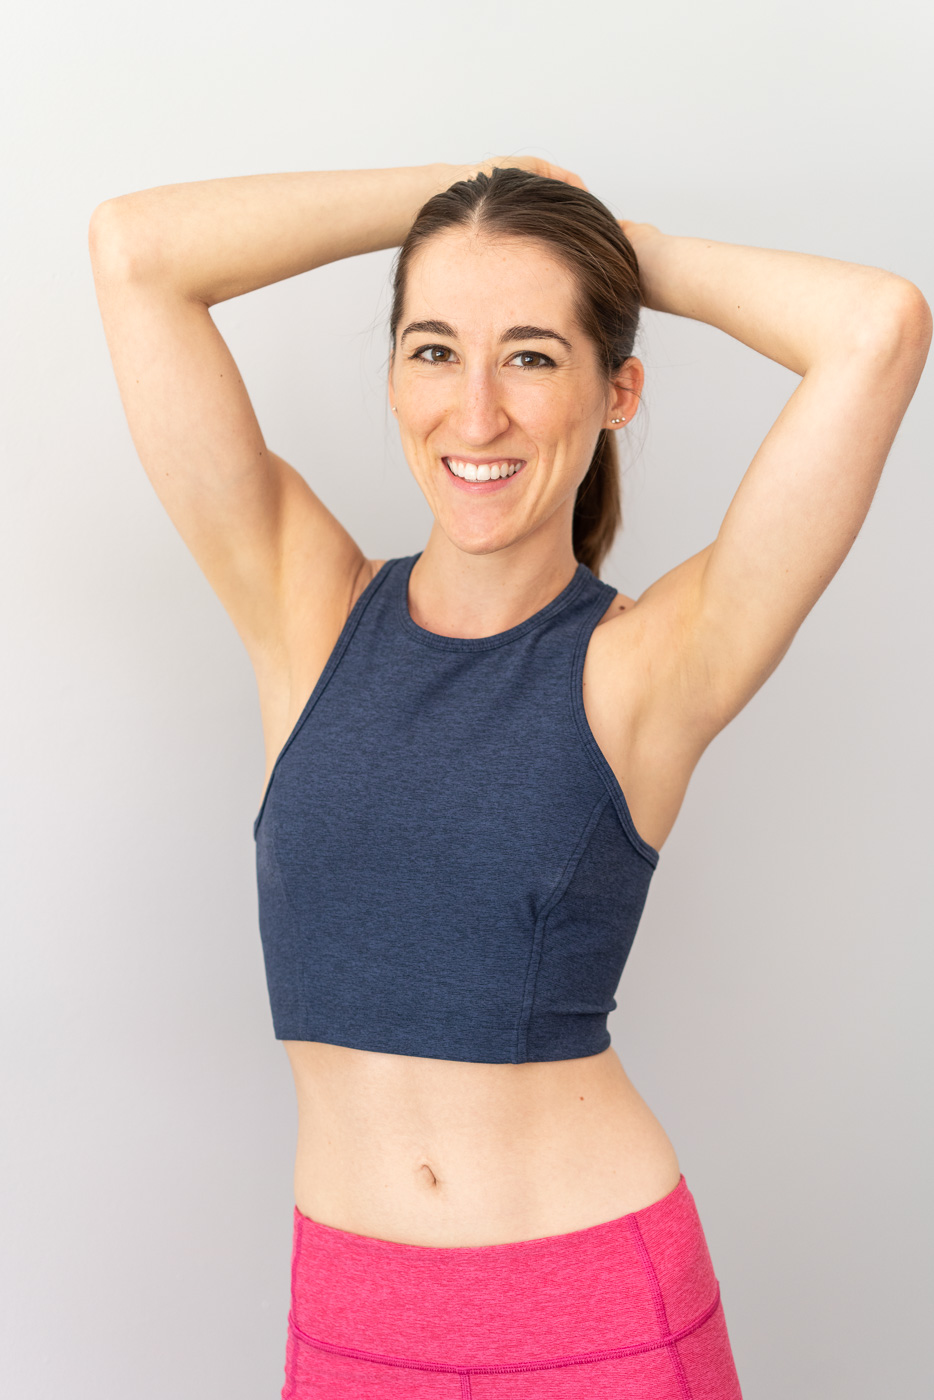 A woman in fitness clothing holding her hands behind her head and smiling